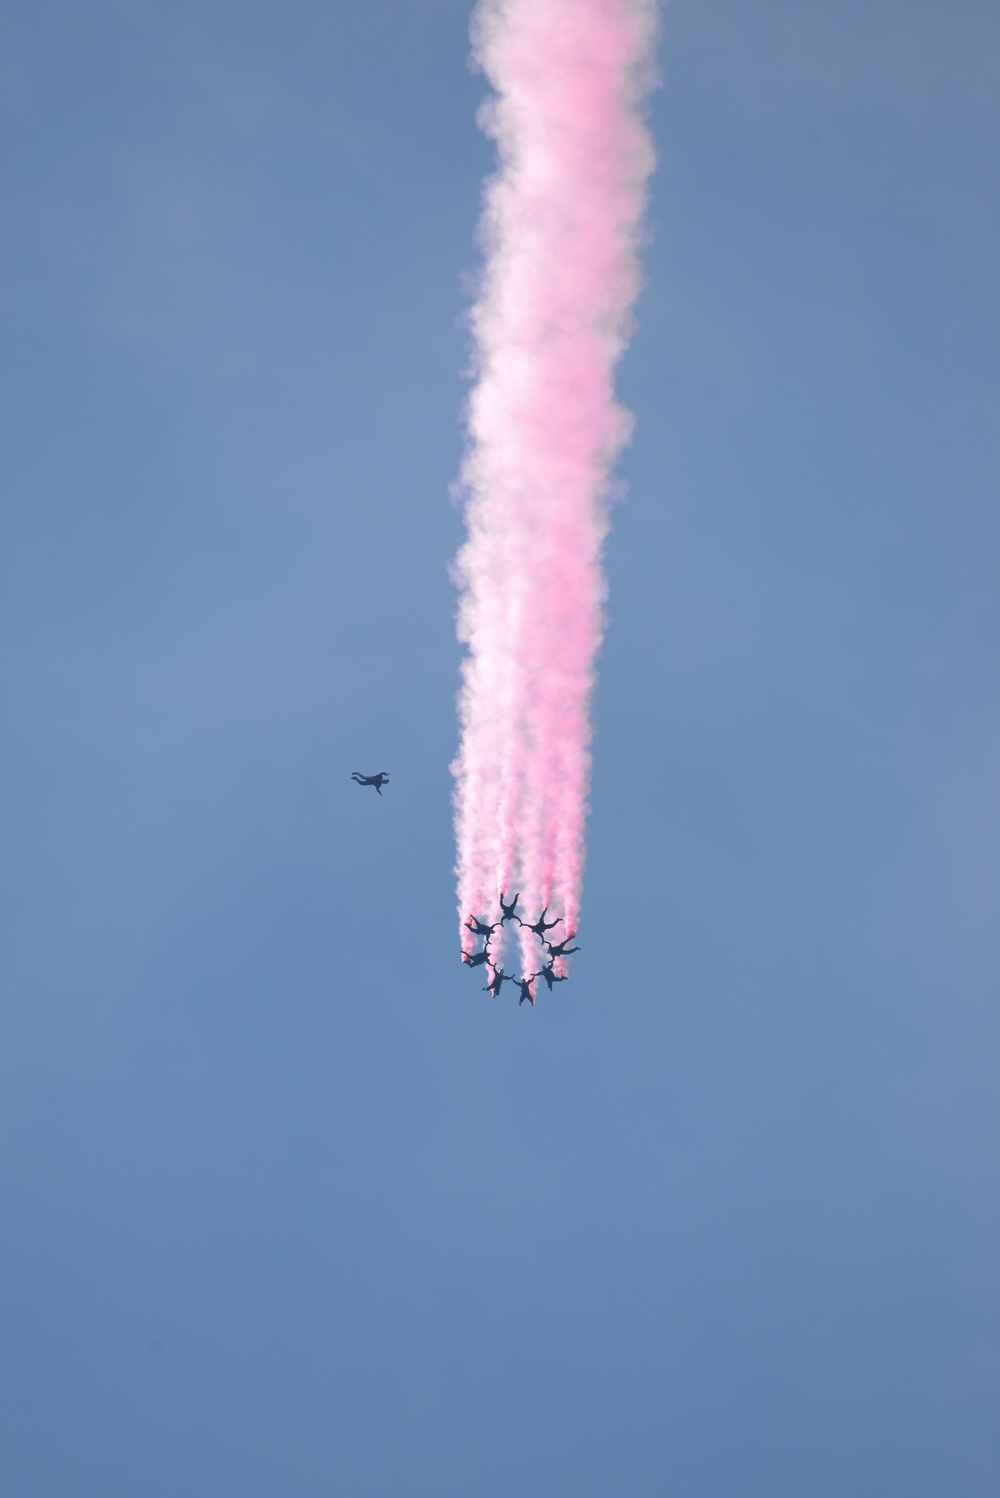 Golden Knights hold formation at 120 miles per hour